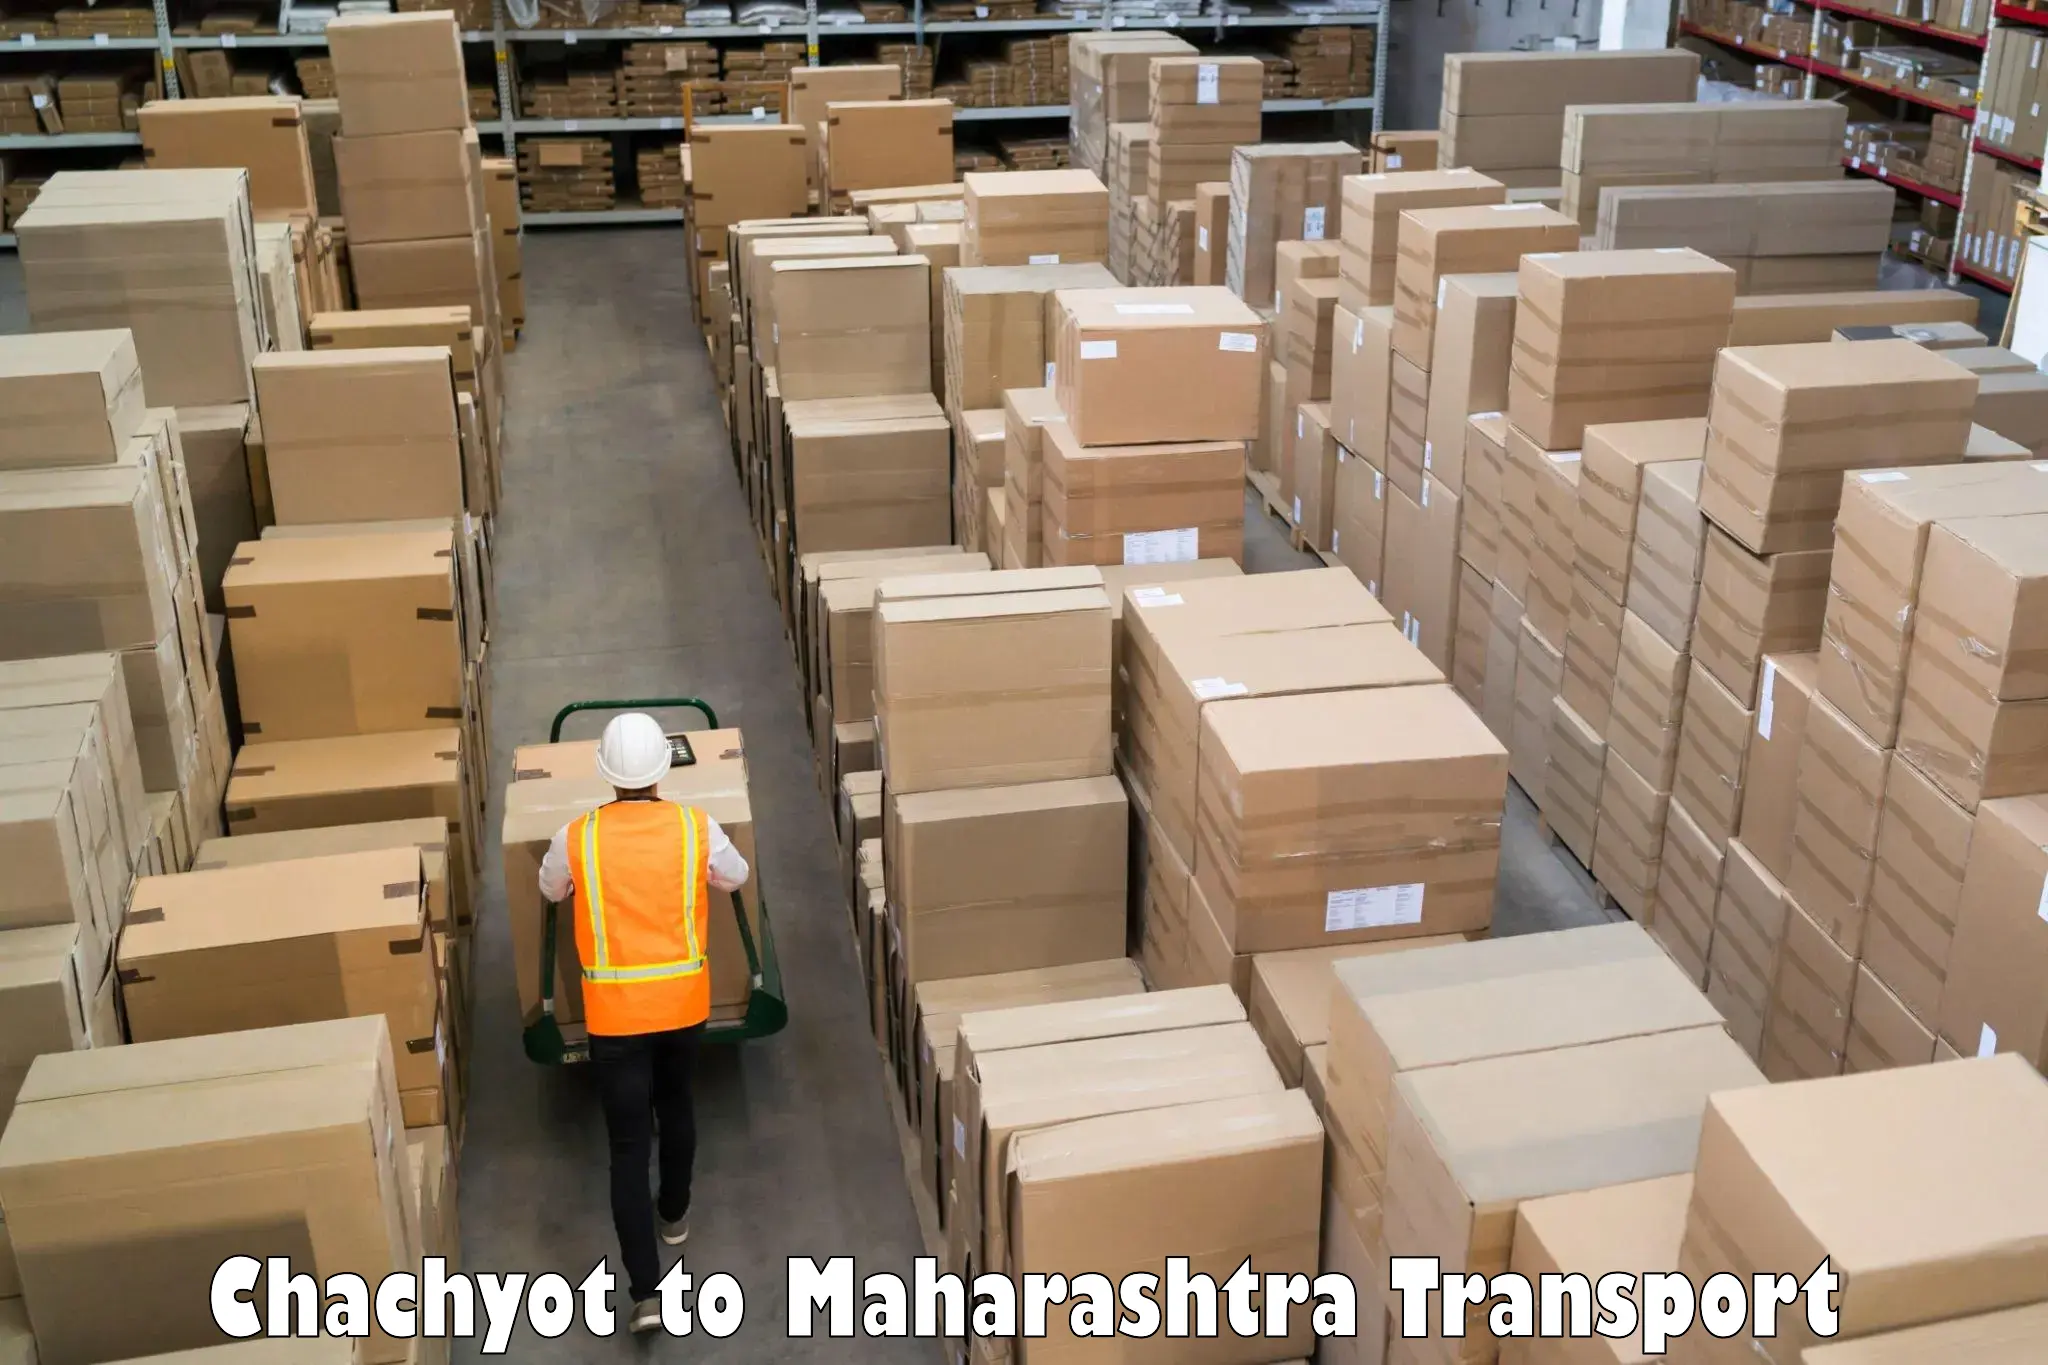 Air freight transport services Chachyot to Beed